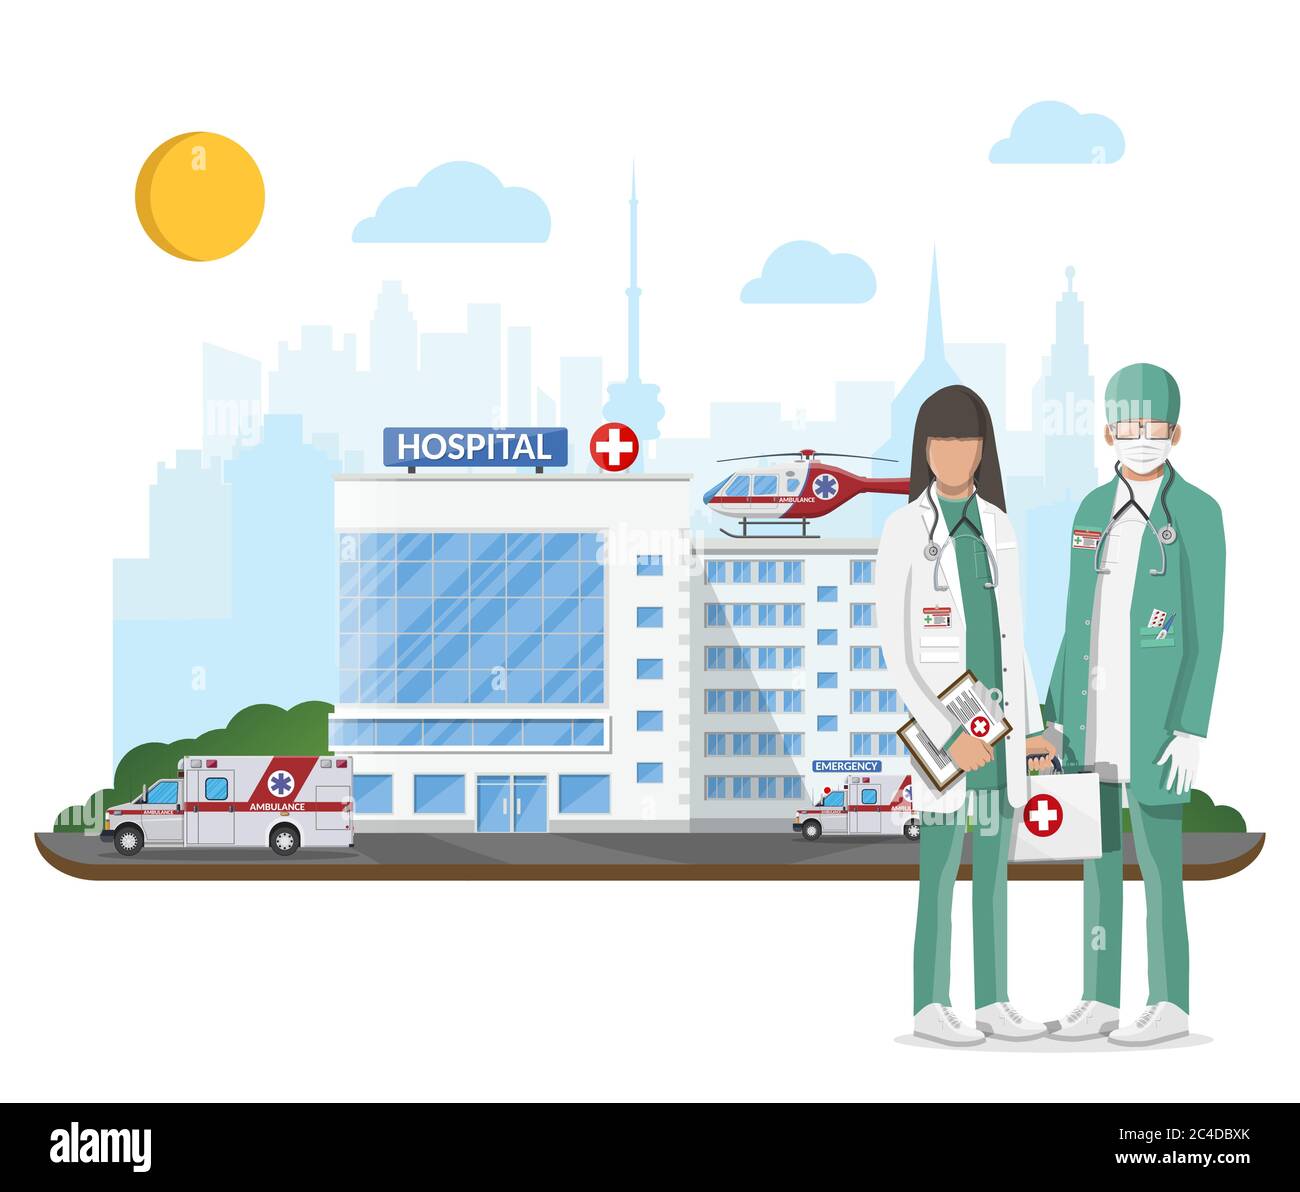 Ambulance staff concept. Hospital building, medical icon. Healthcare, hospital and medical diagnostics. Urgency and emergency services. Road, sky, tree. Car and helicopter. Flat vector illustration Stock Vector